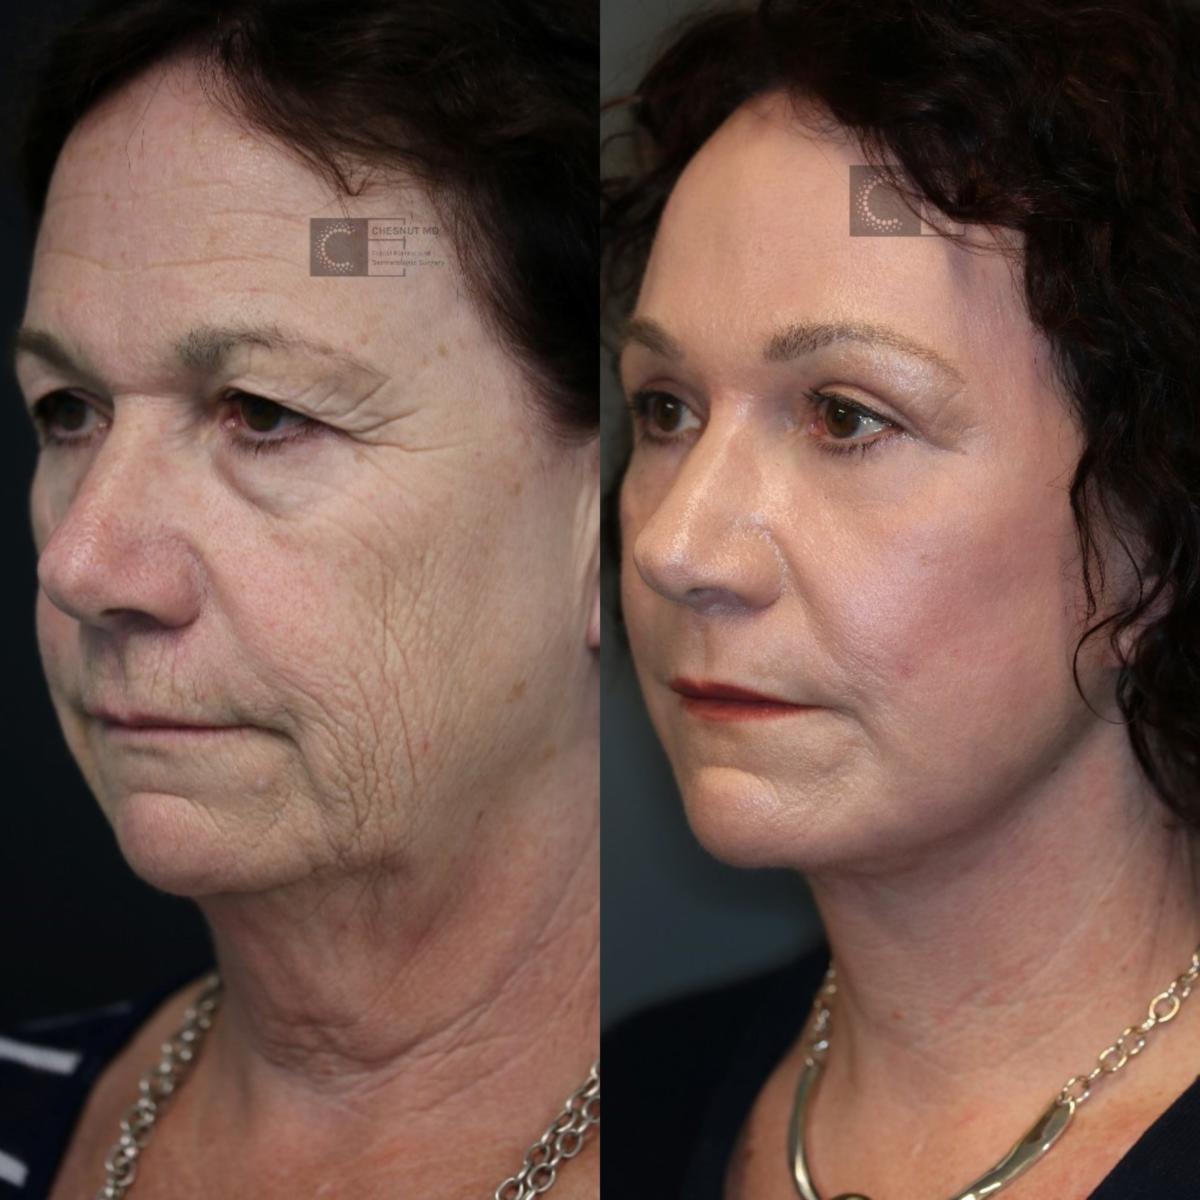 Before and after laser skin resurfacing